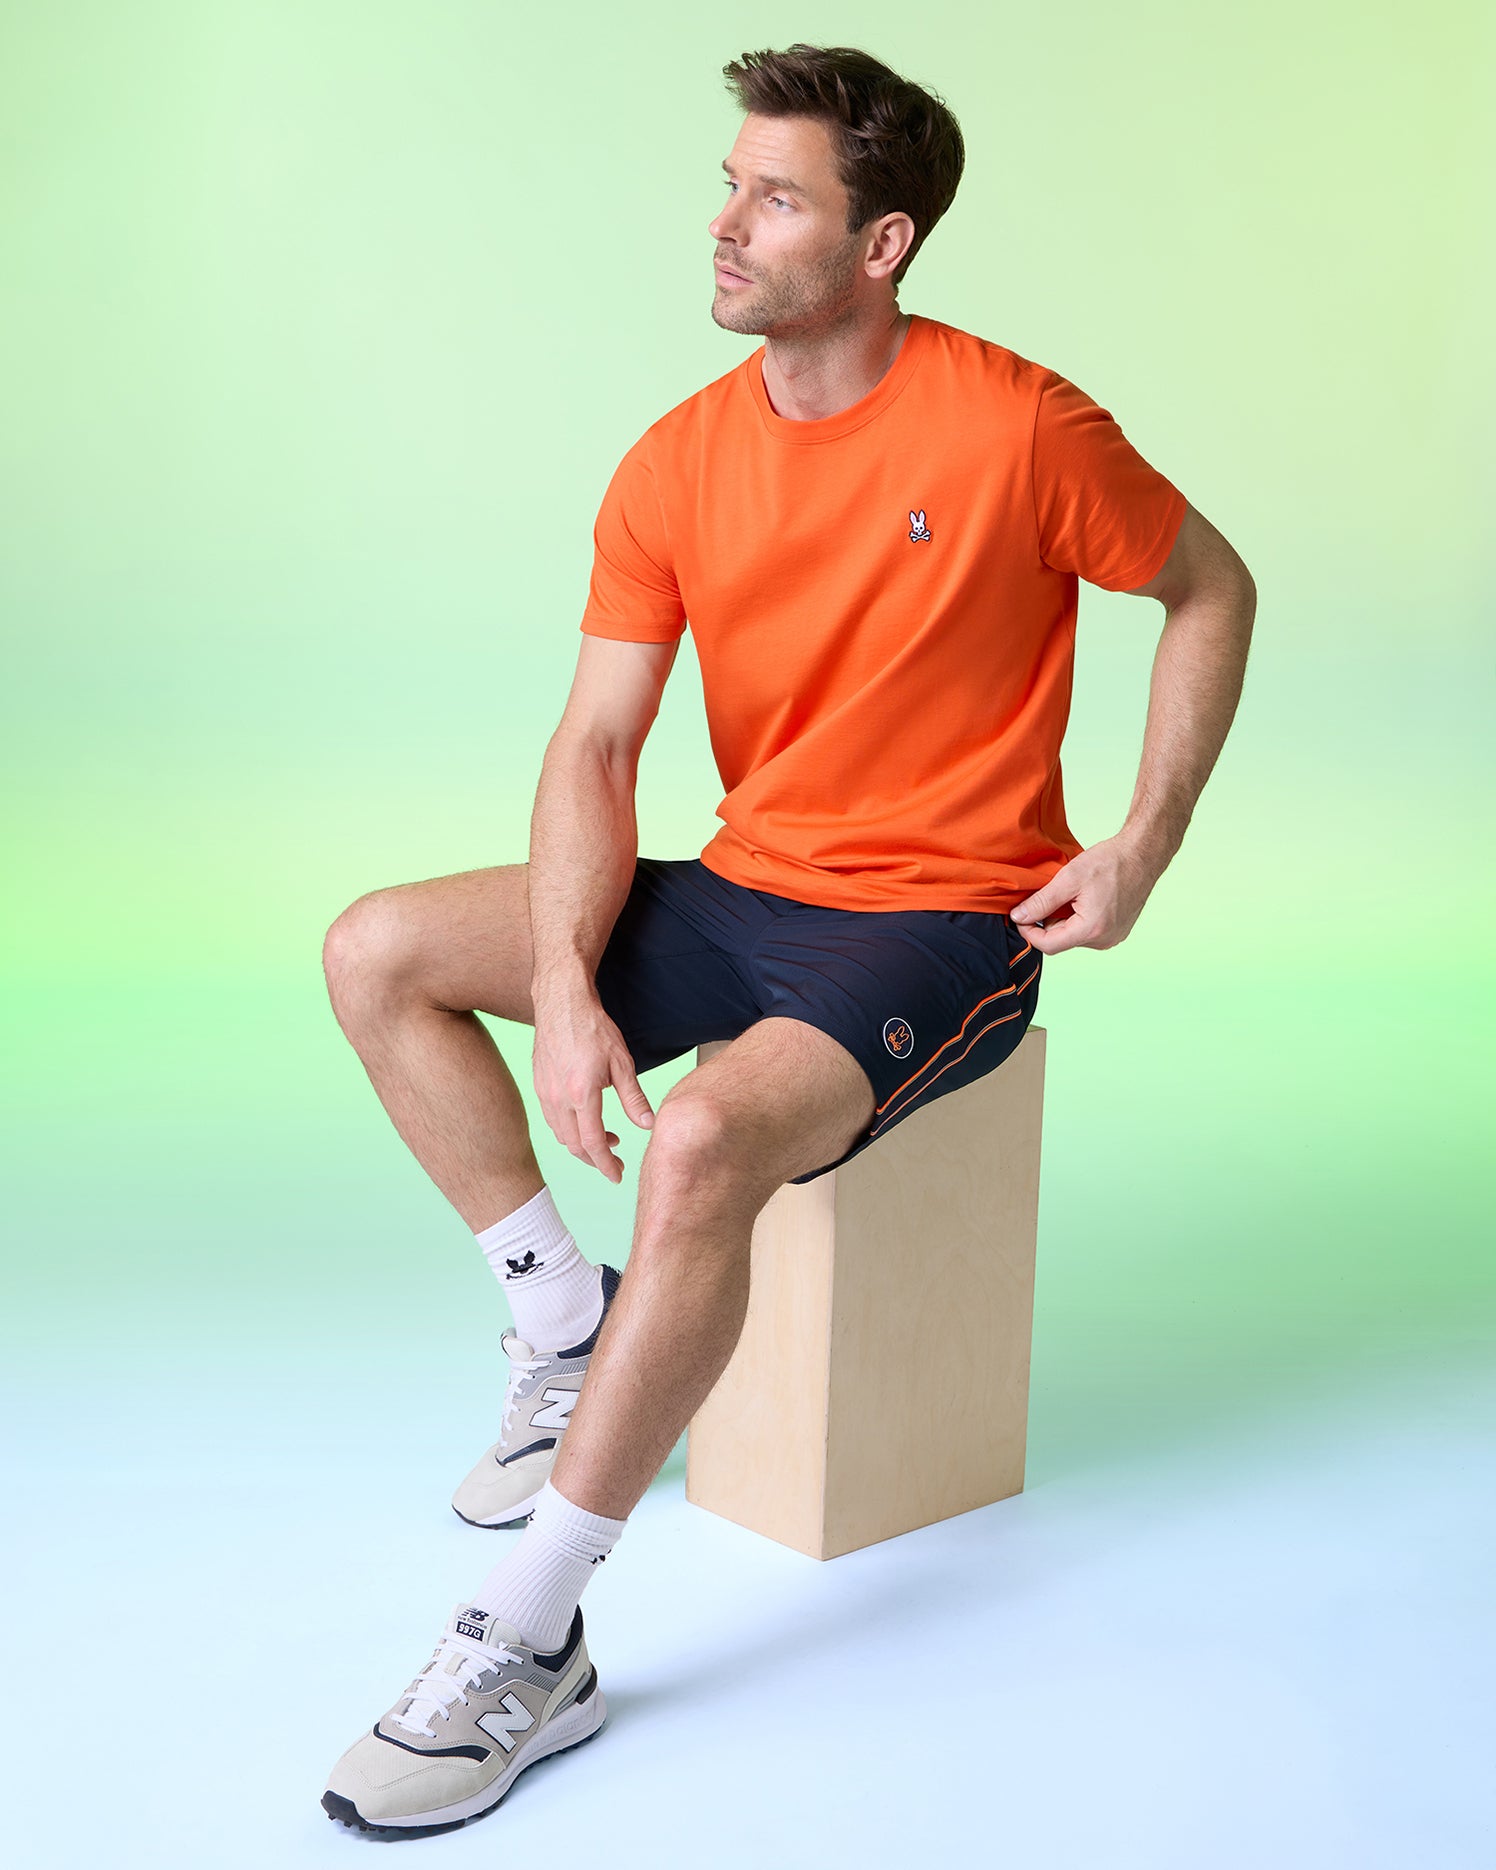 A man sits on a wooden block against a gradient green background. He wears an orange Psycho Bunny men's MENS CLASSIC CREW NECK TEE - B6U014CRPC with an embroidered Bunny logo, navy shorts, white socks, and gray sneakers. His hands rest on his thighs as he gazes to the side.